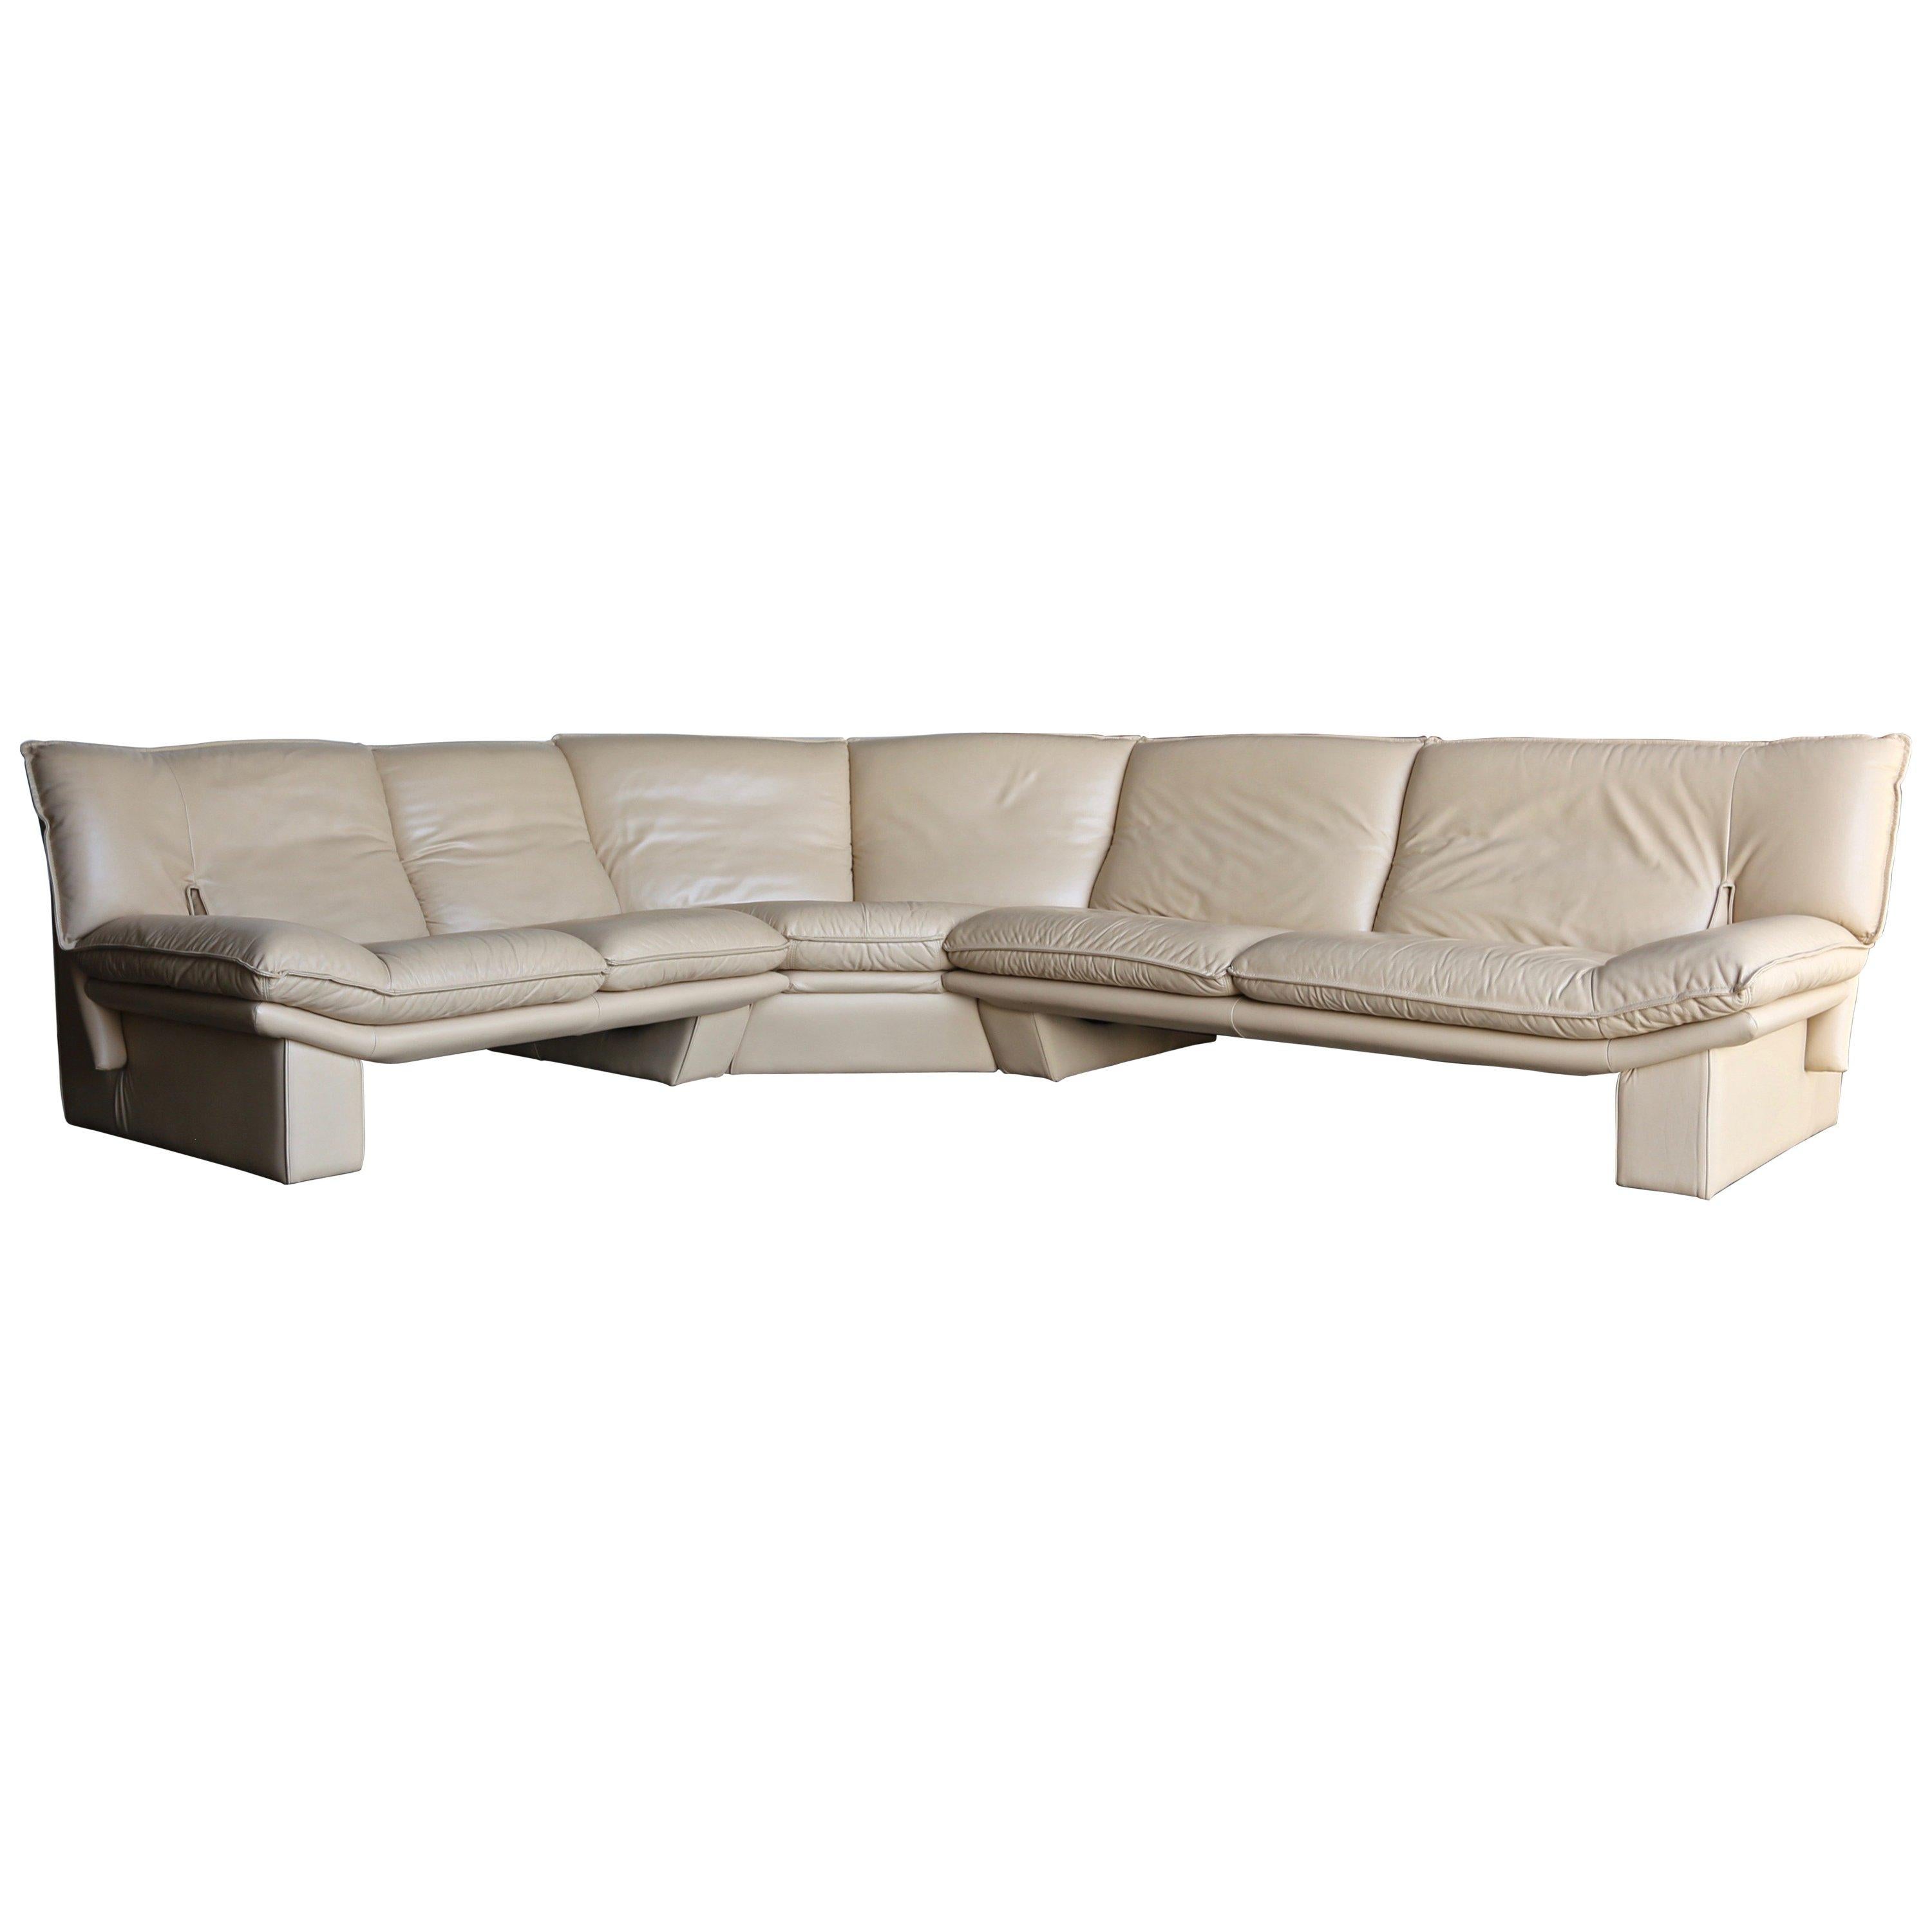 Nicoletti Salotti leather sectional sofa circa 1985. This piece is in very good to excellent original condition. This sofa retains its original tag.